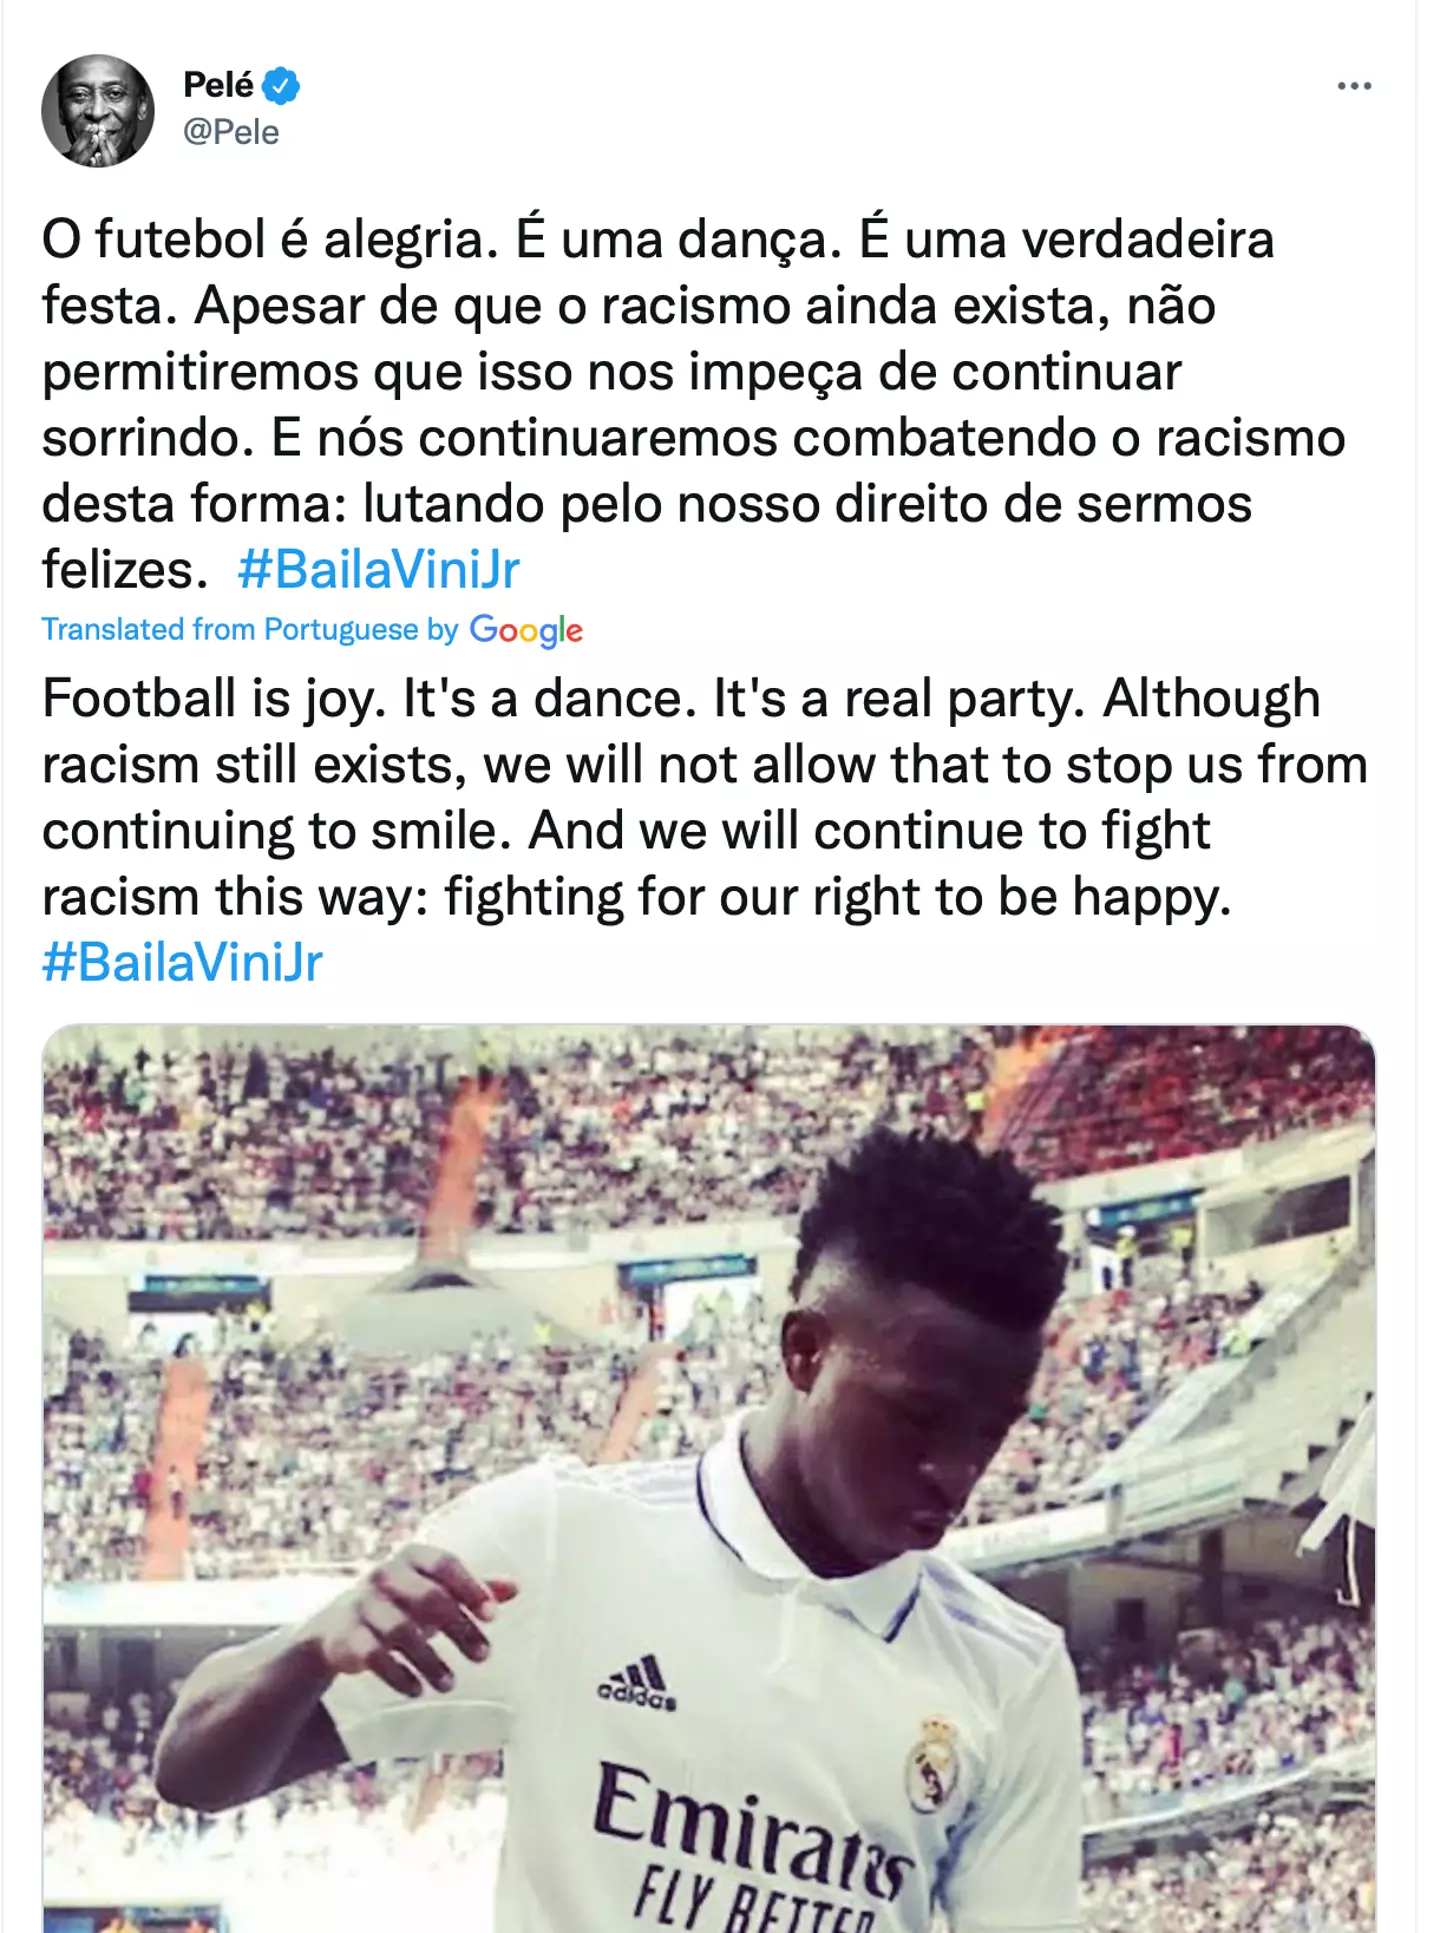 Fellow countryman Pele came out in support of Vinicius Jr.